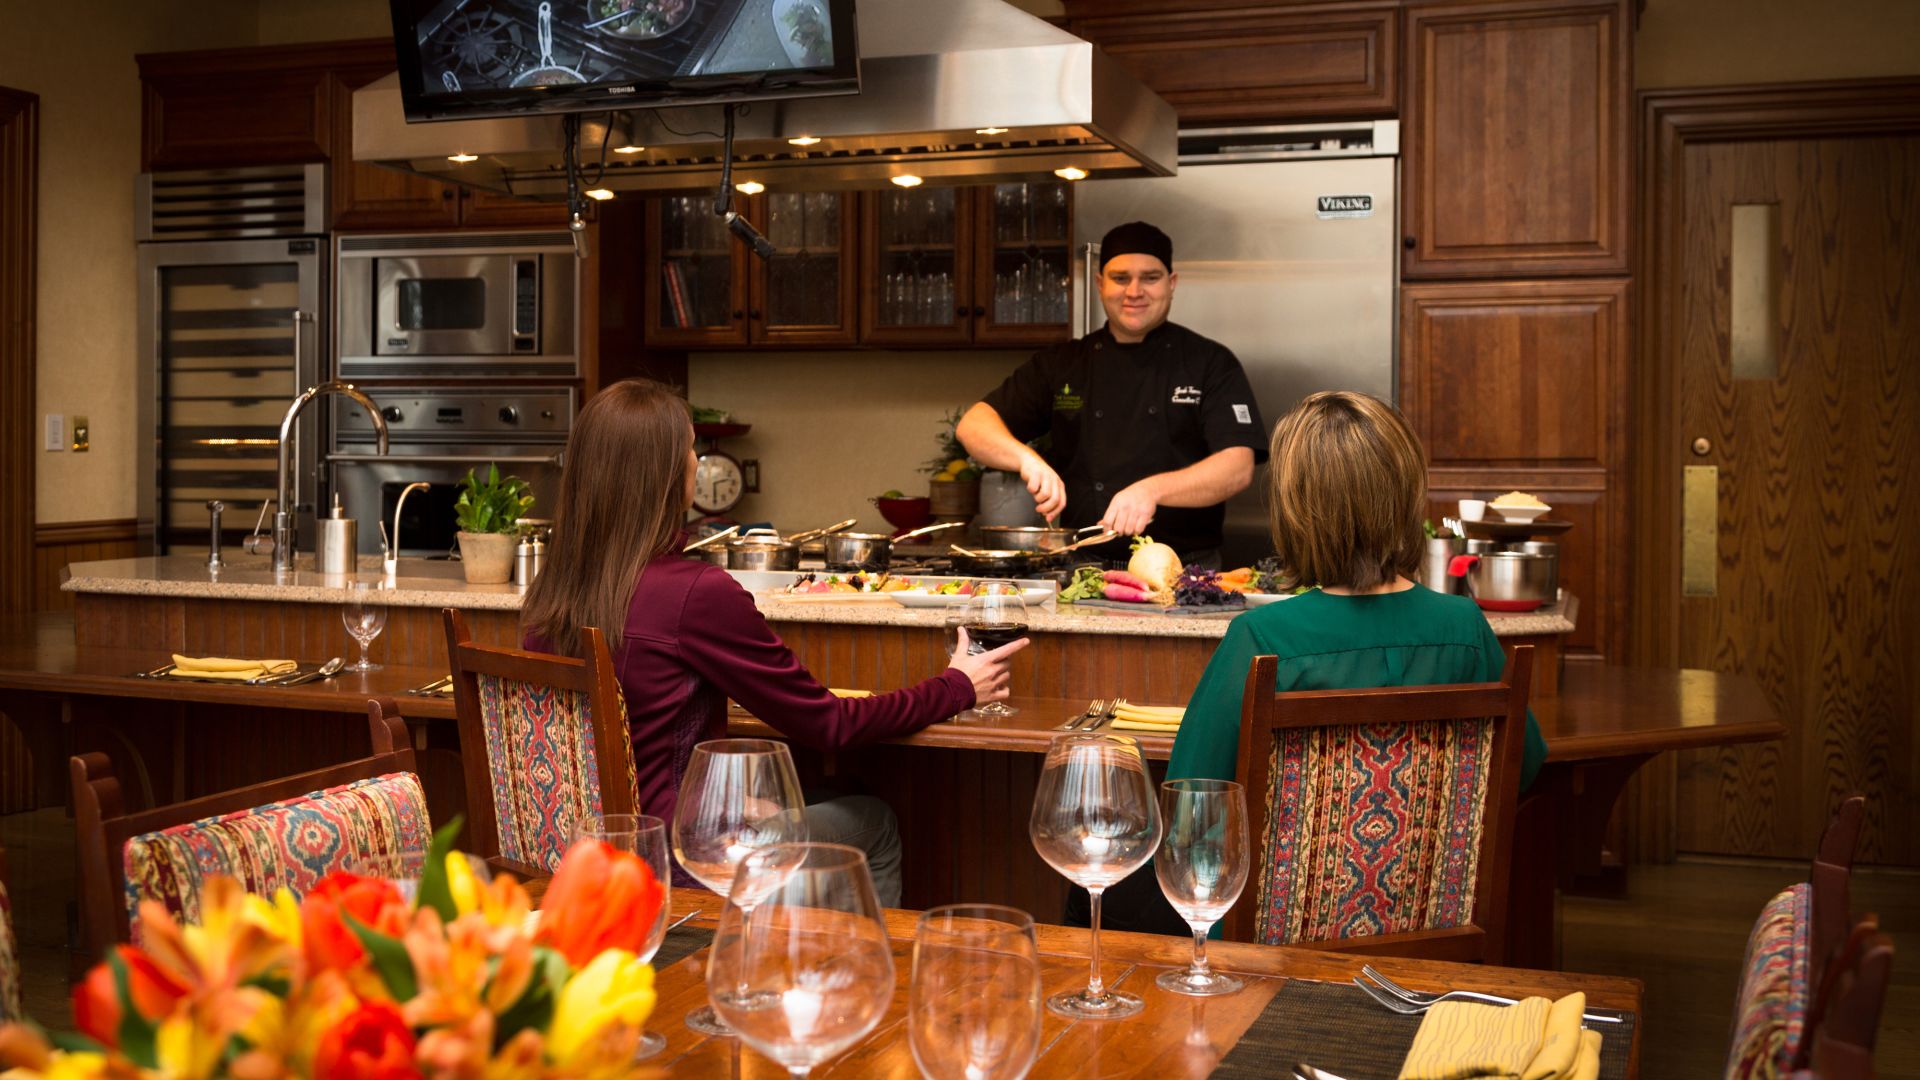 A cooking demonstration attended by two women in the Demo Kitchen at The Lodge at Woodloch